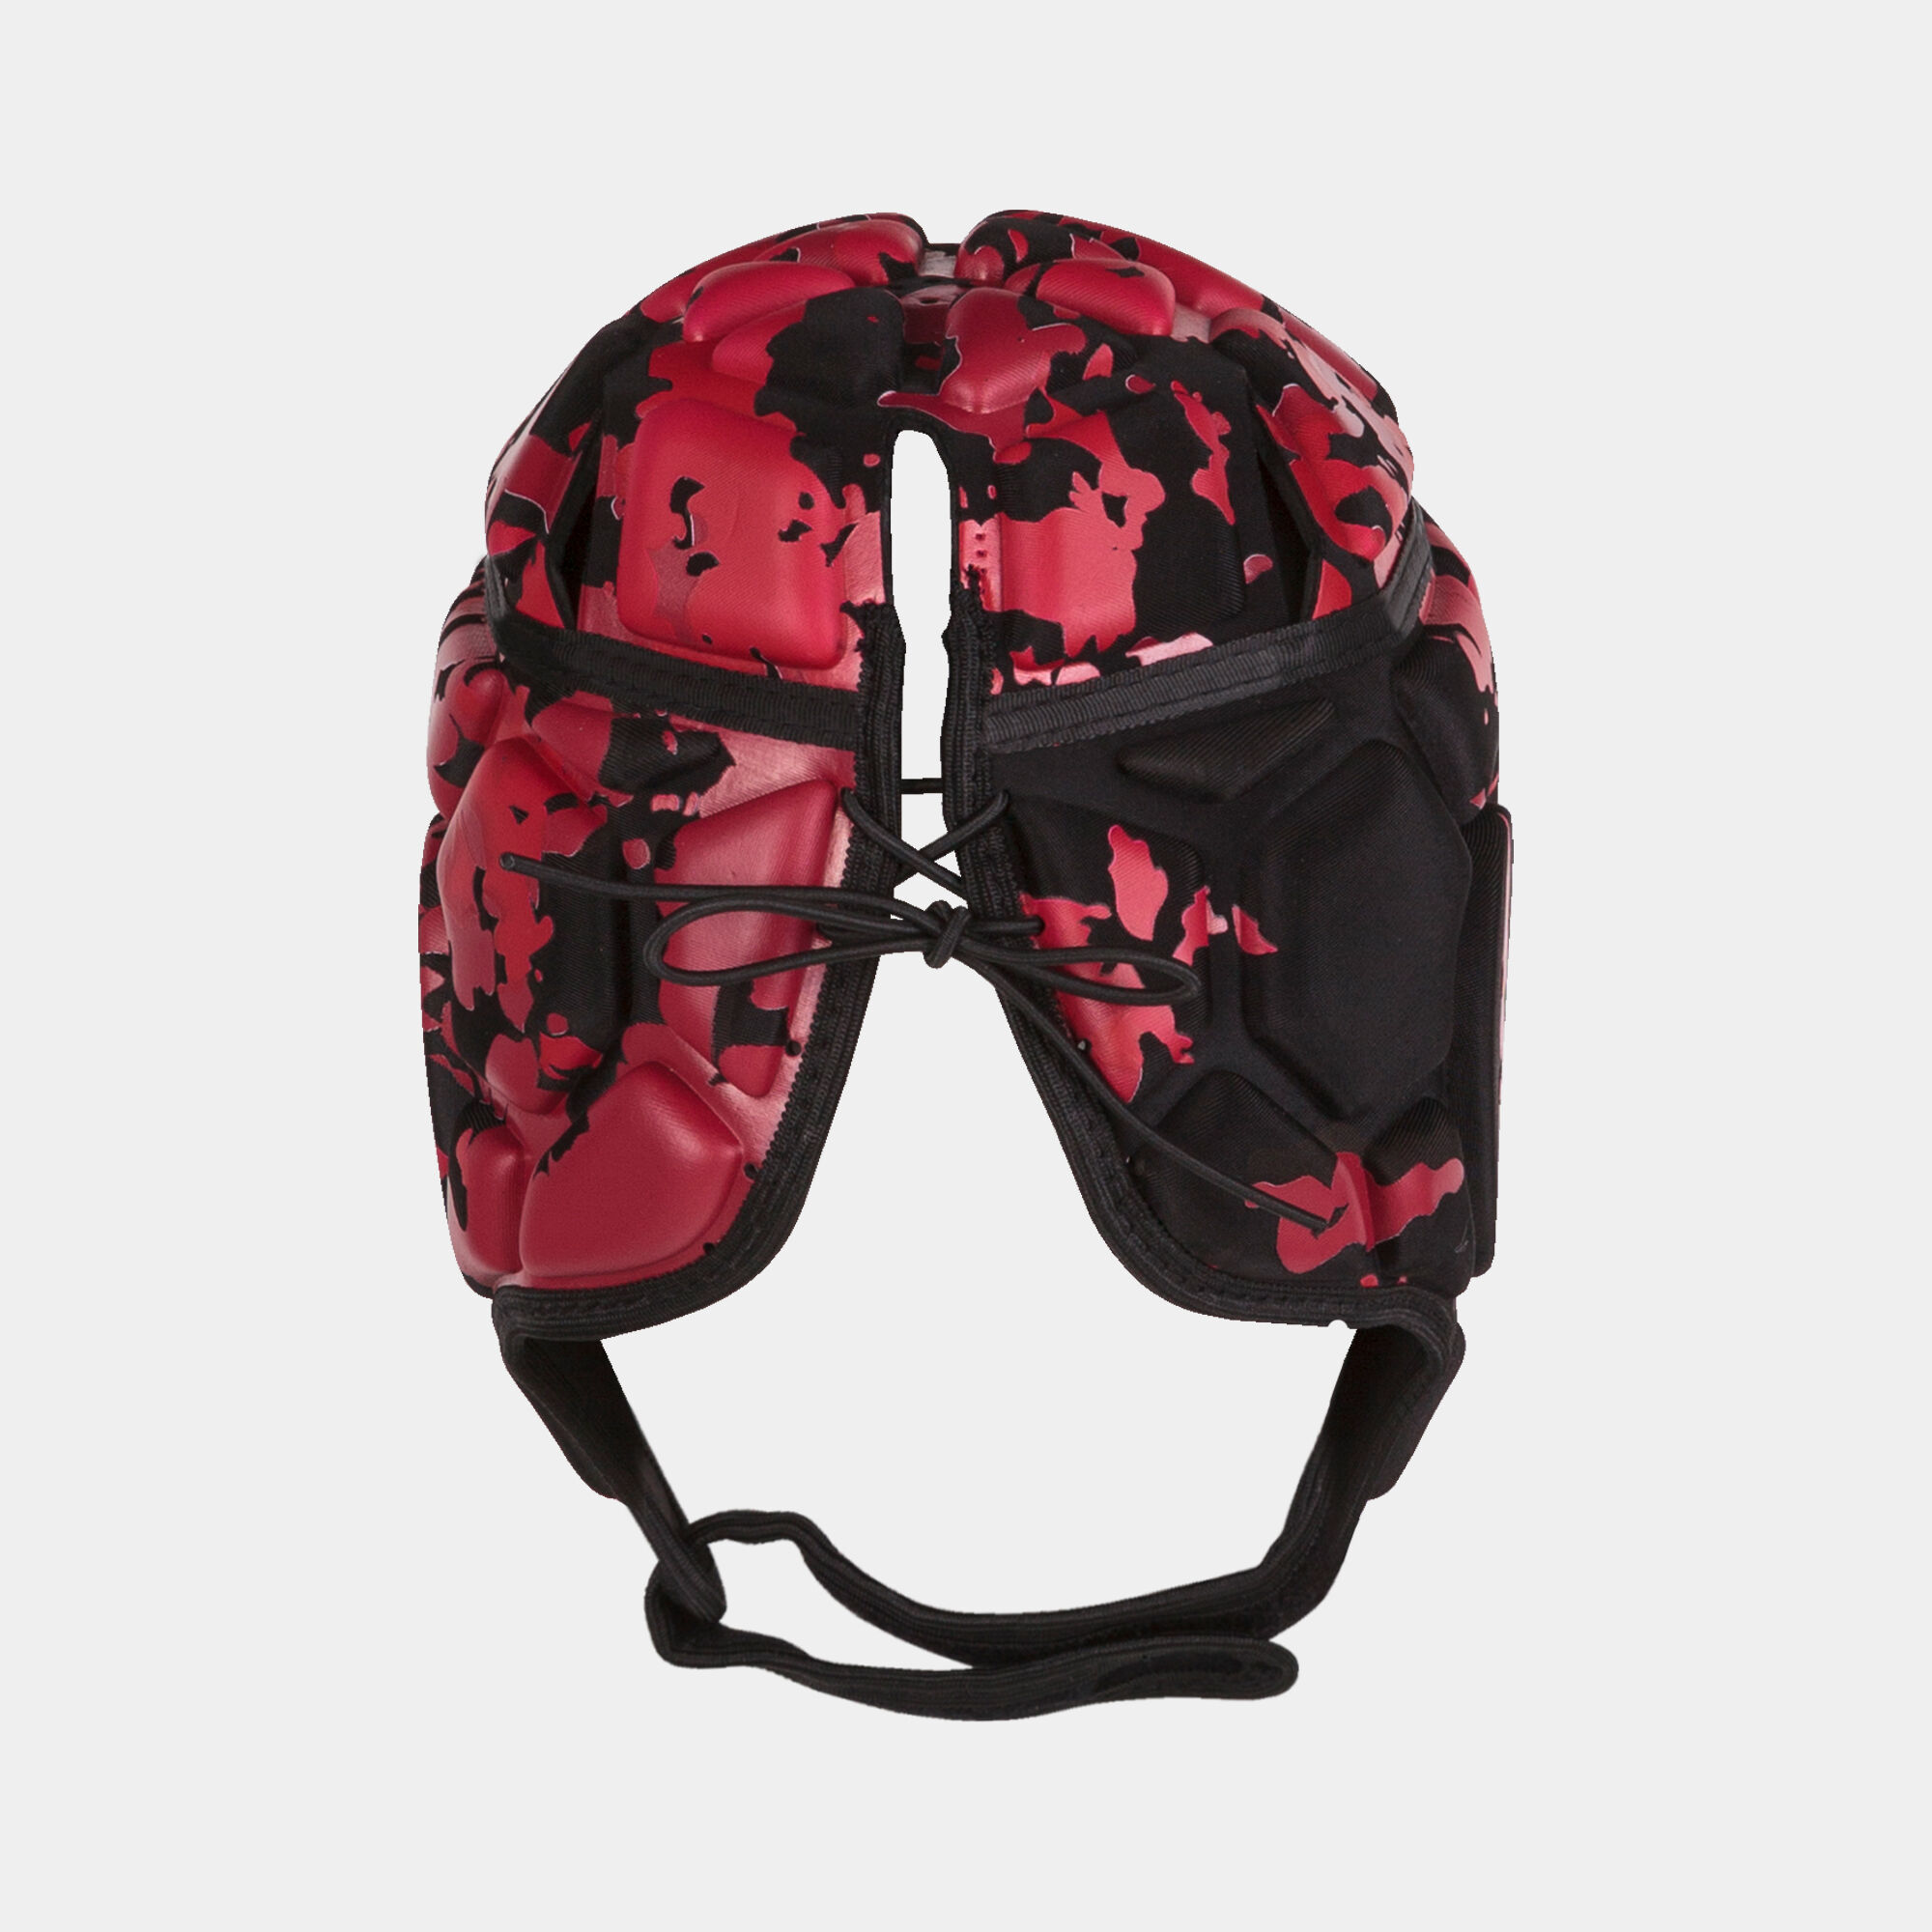 RUGBY SAFETY HELMET PROTECT BLACK RED